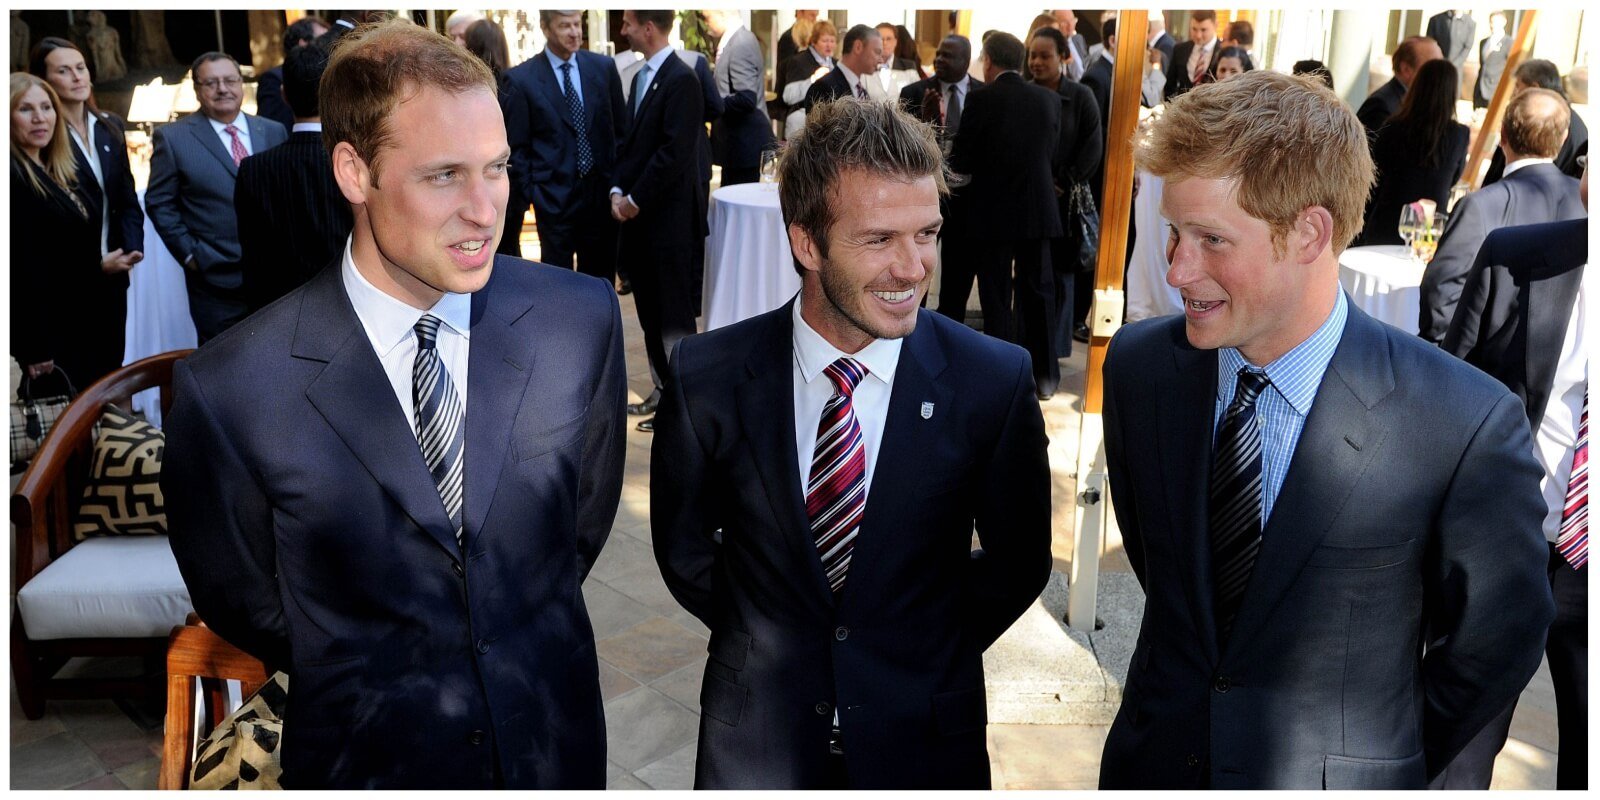 Prince William, David Beckham, and Prince Harry photographed in 2010.